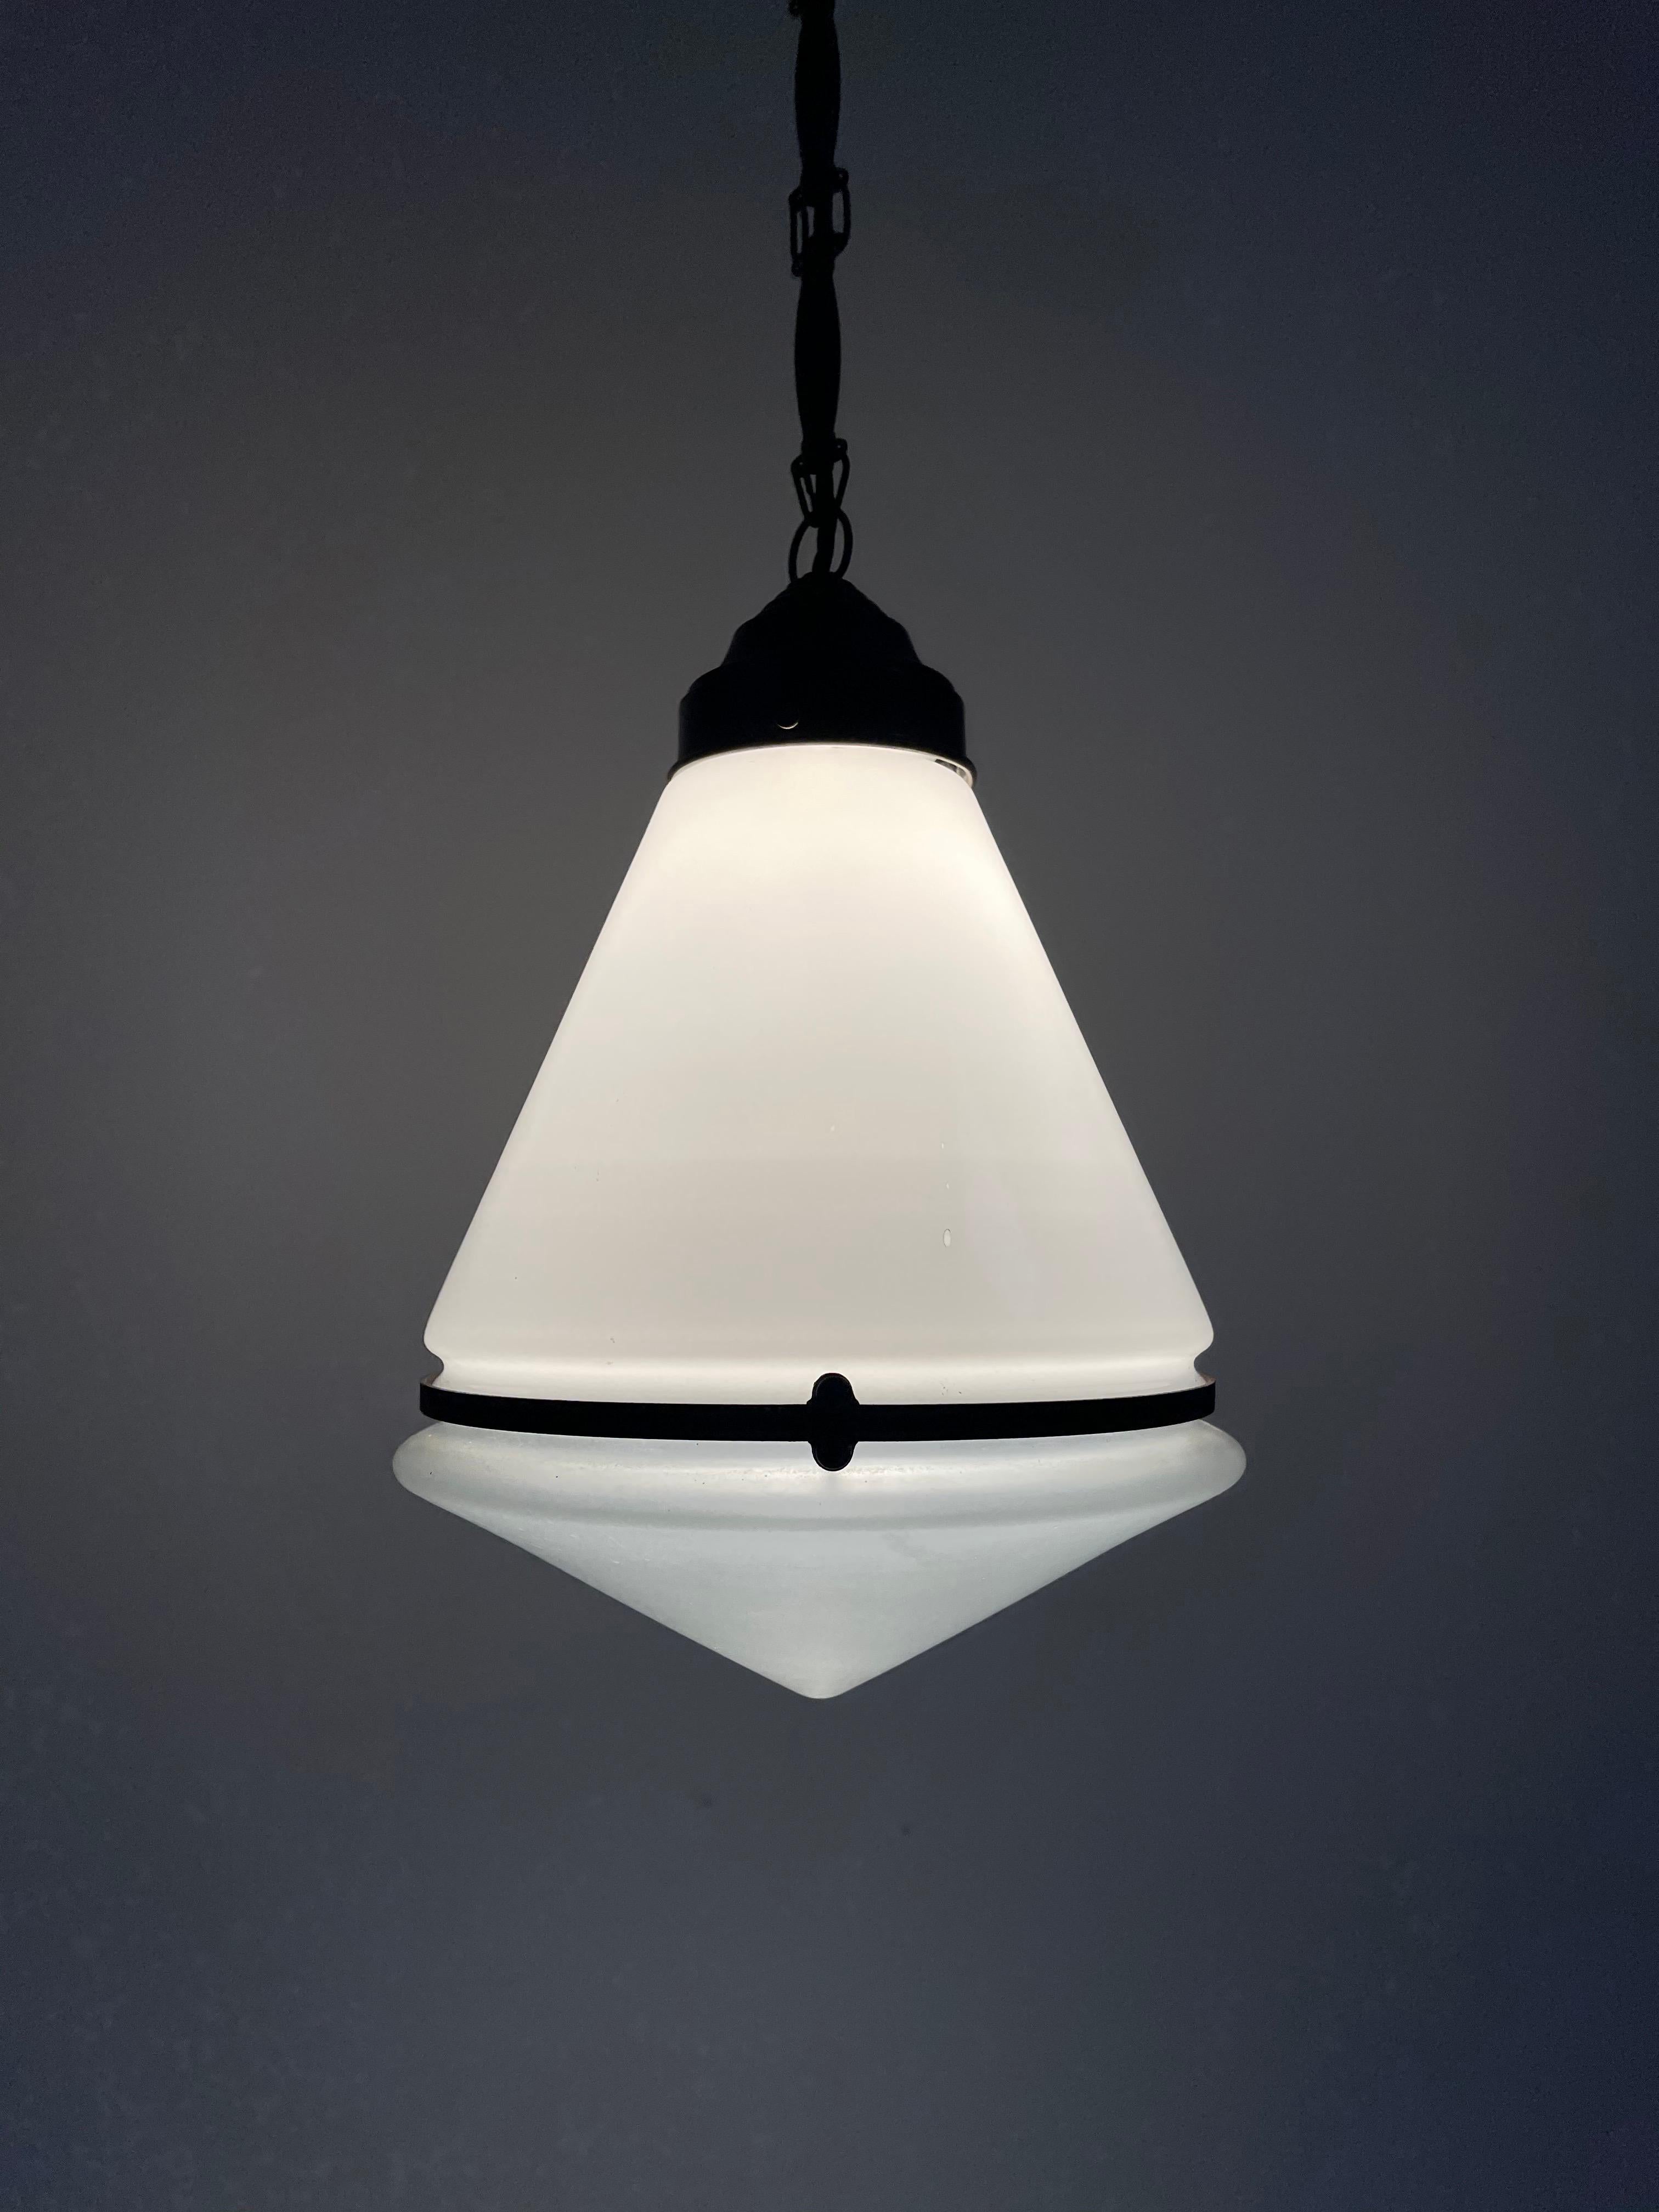 - An original and incredibly rare conical pendant light by Peter Behrens for AEG, German circa 1920. 
- The light has two glass parts, the upper section is opaline and the lower triangular dish is frosted. 
- Fantastic original condition, a